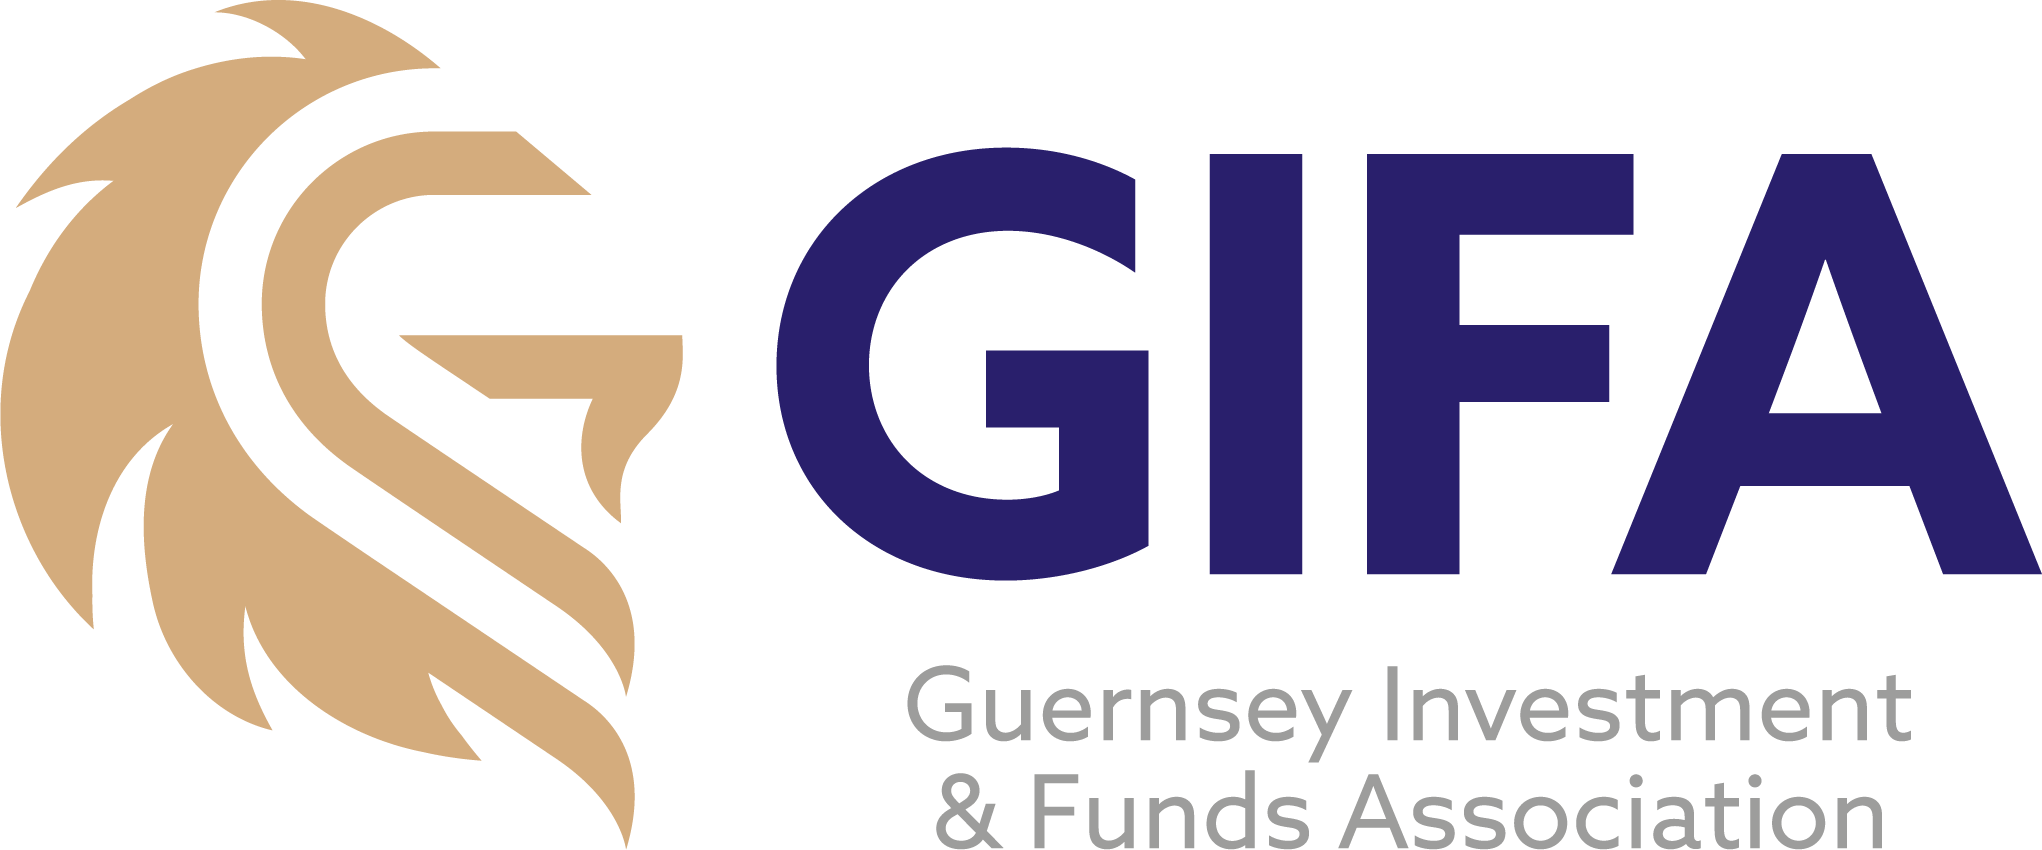 Guernsey Investment and Funds Association logo